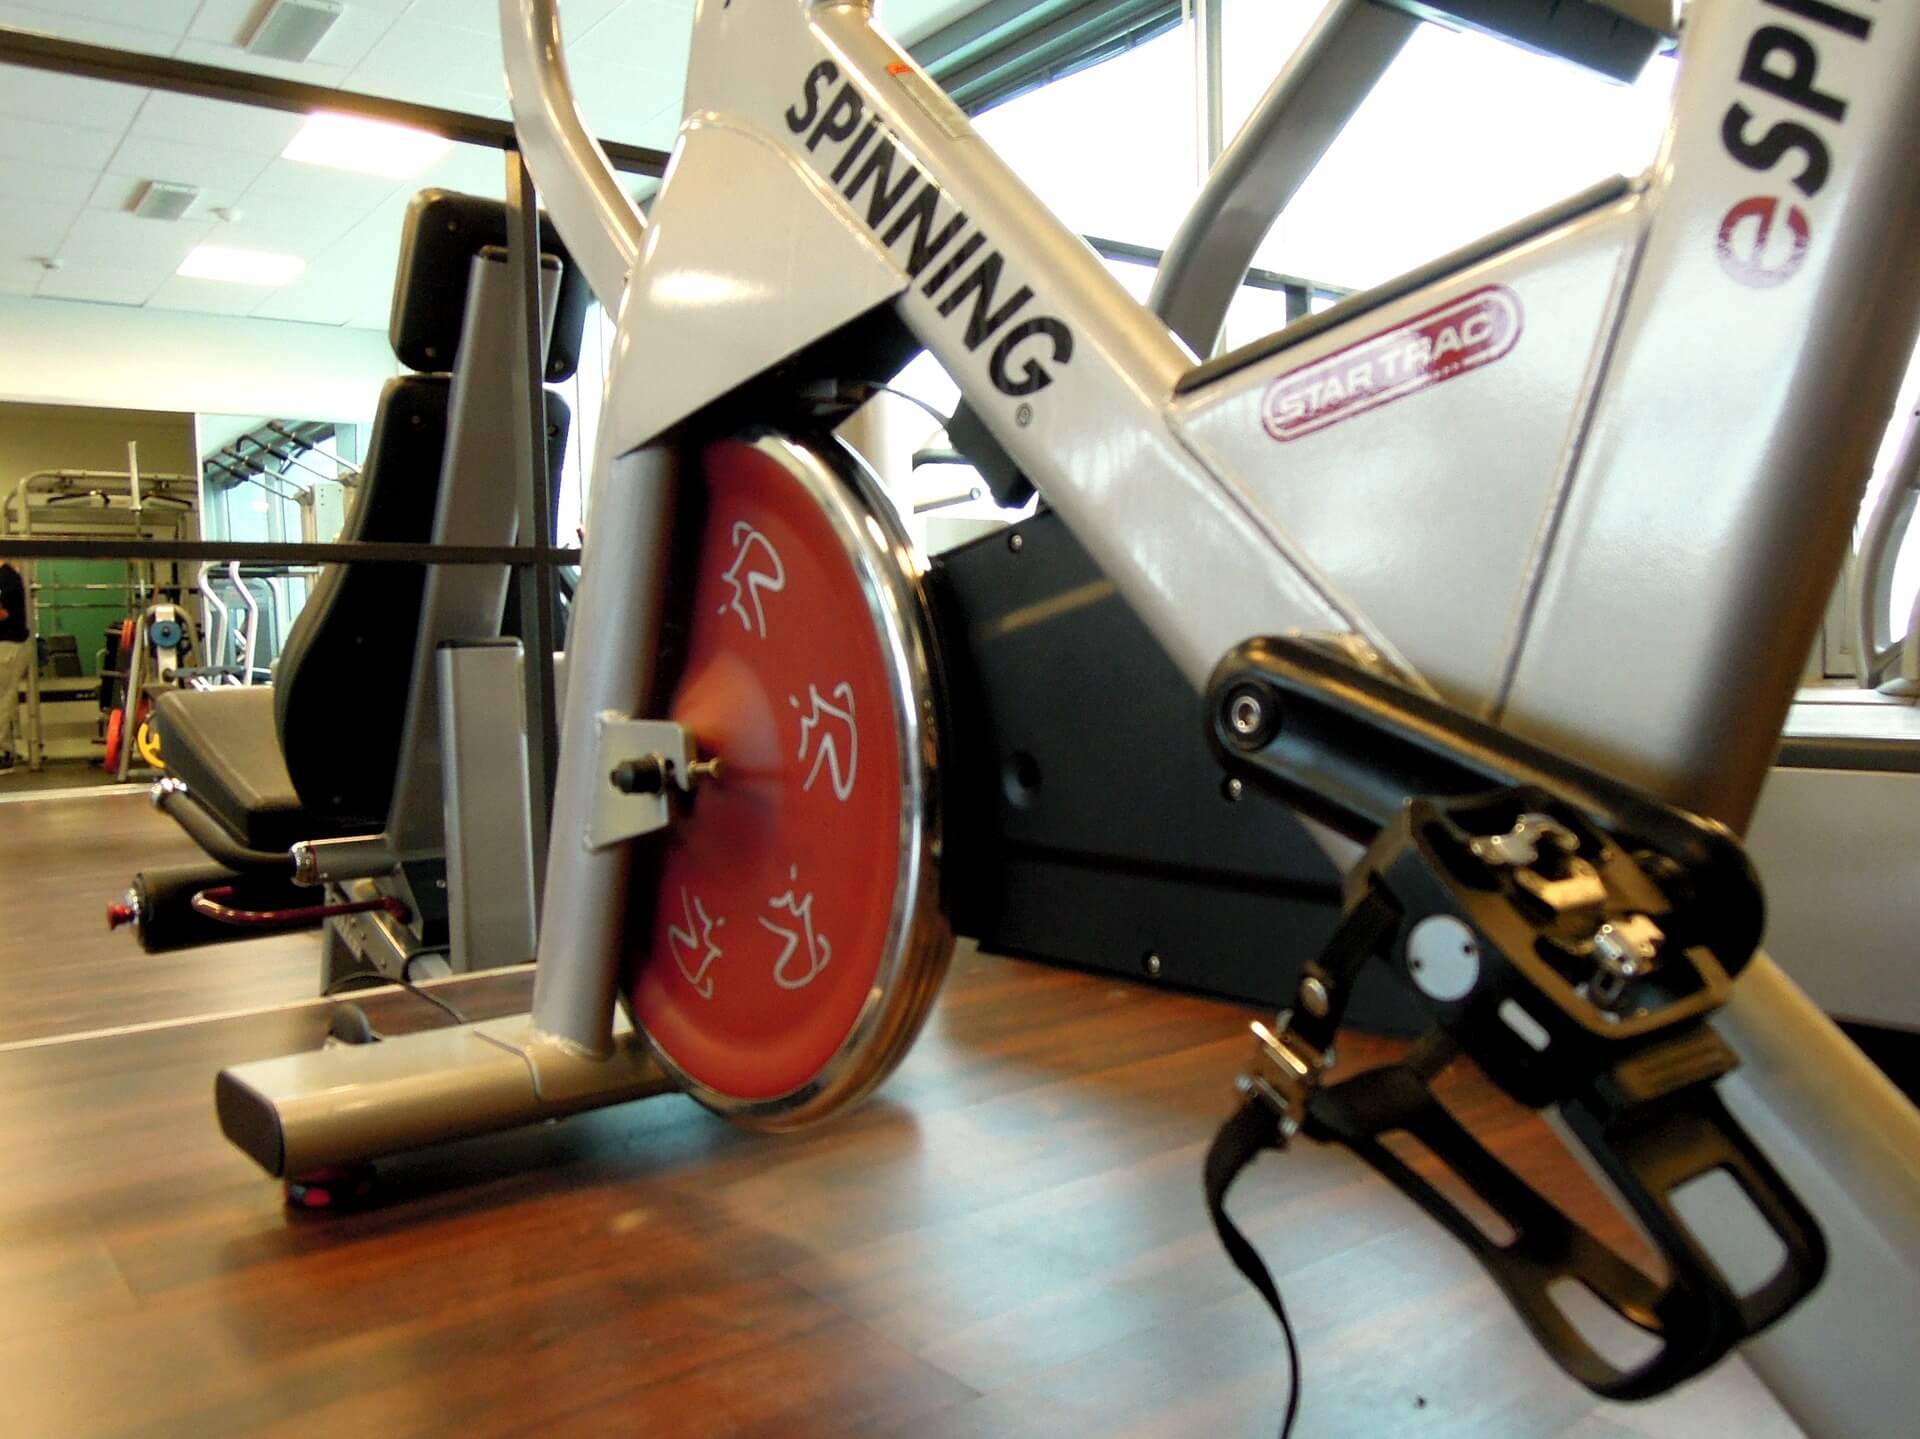 Indoor cycling is a great way for runners to cross train